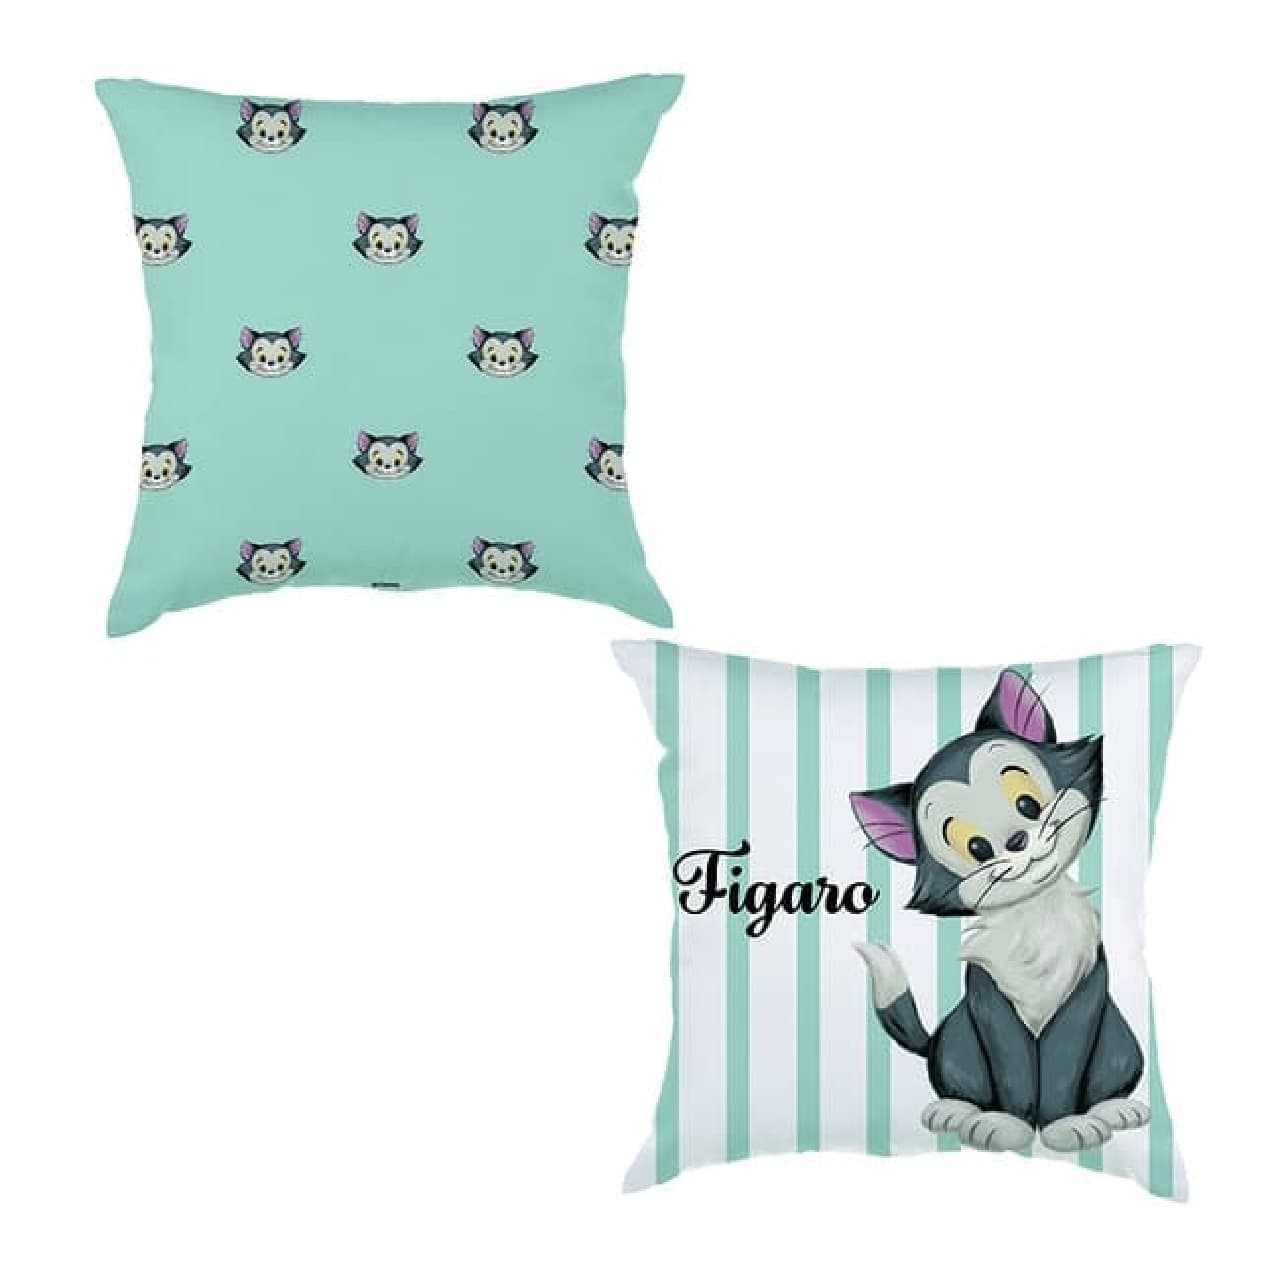 Disney Store "Cat's Day" Items -- Marie, Figaro, and Lucifer in Pretty Dull Pastel Colors